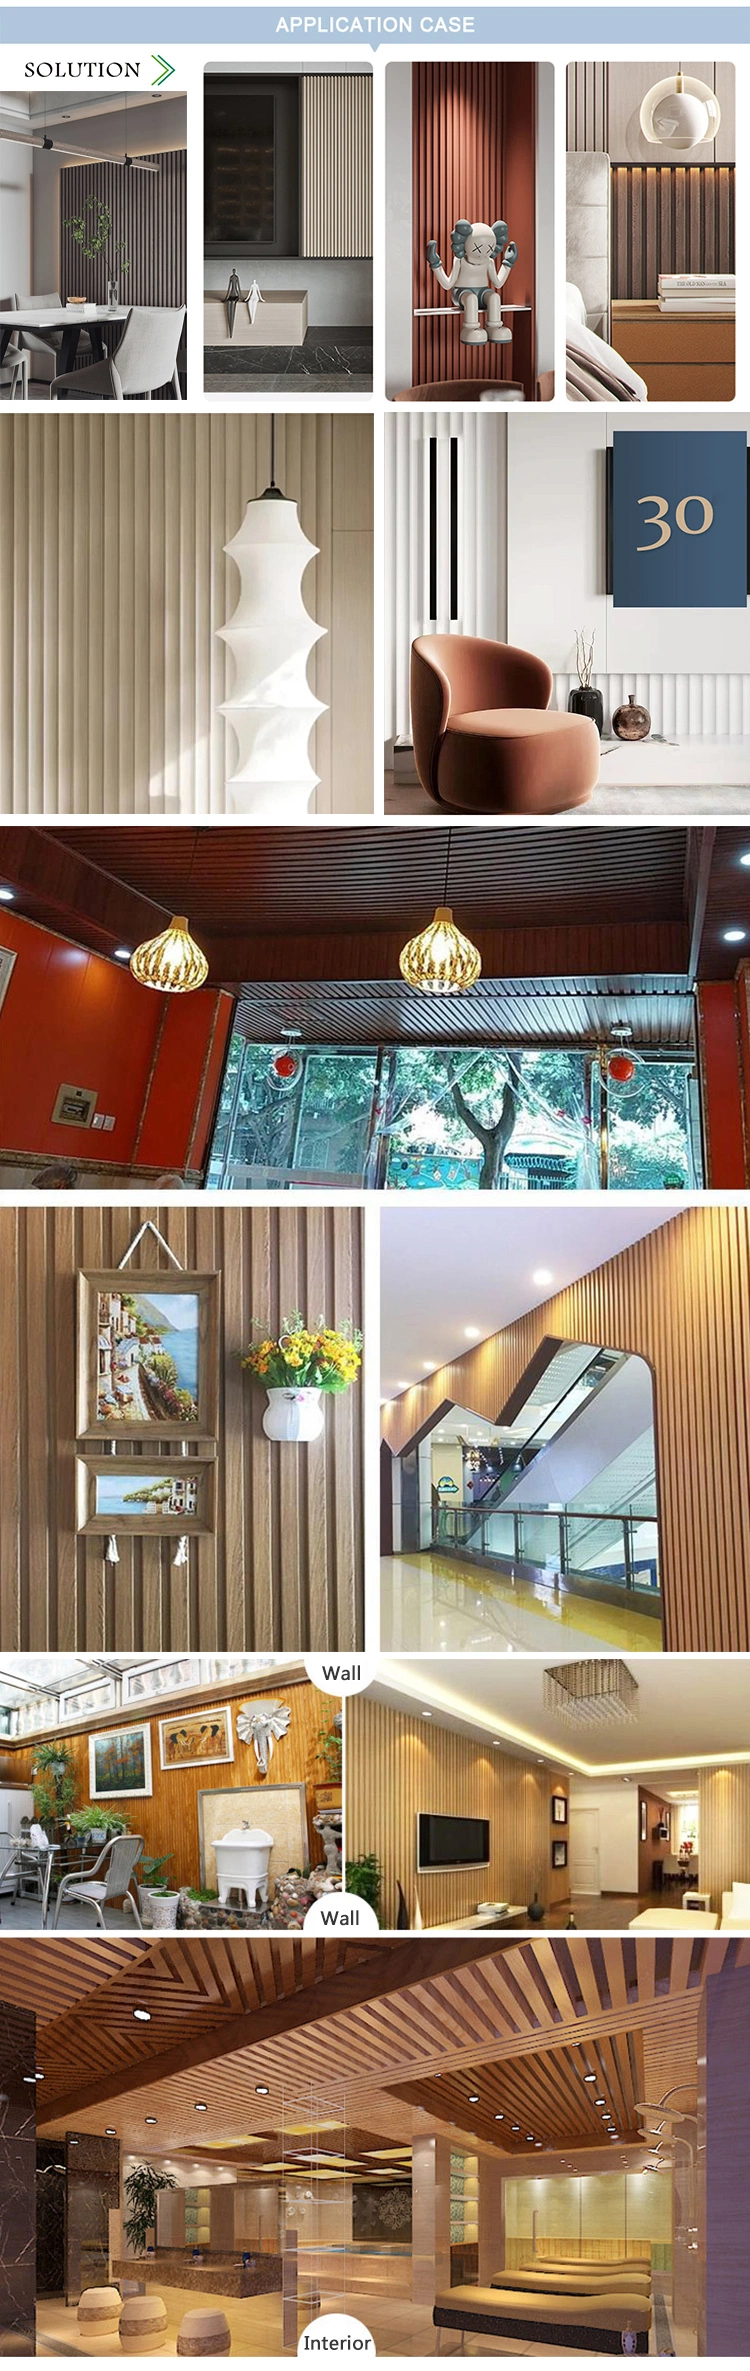 Latest Water Proof Eco Friendly Interior Composite WPC Wall Cladding Indoor Panels Tiles